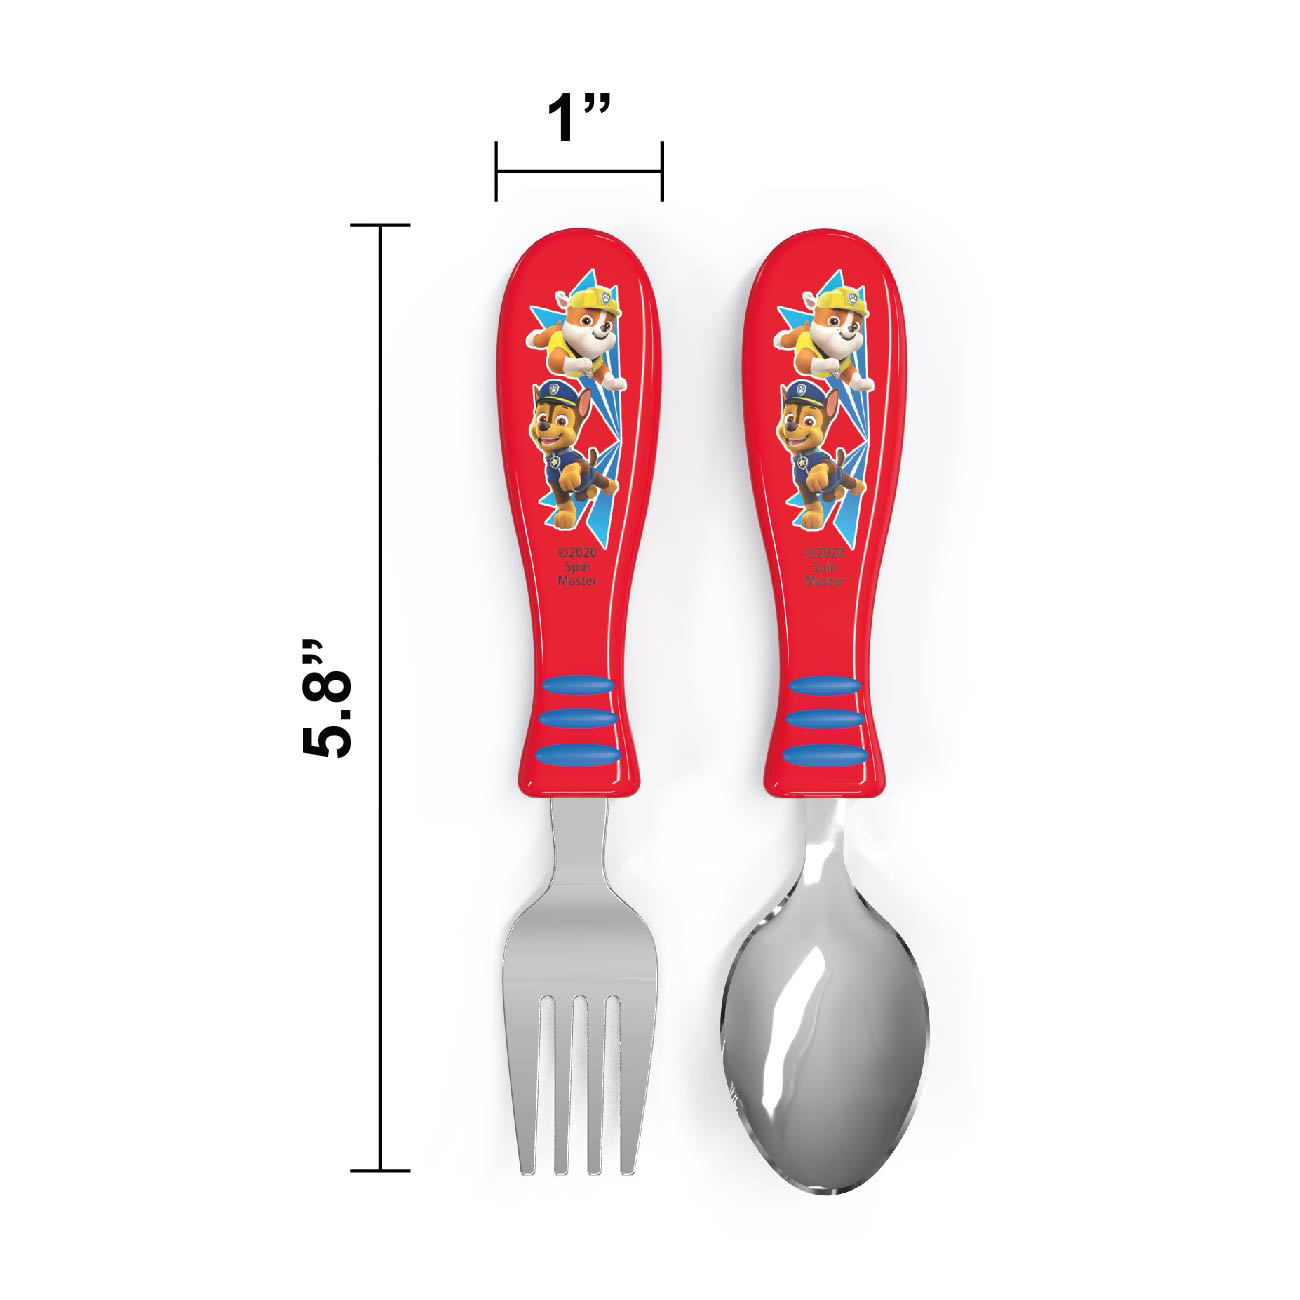 Paw Patrol Kid’s Flatware, Chase and Rubble, 2-piece set slideshow image 5